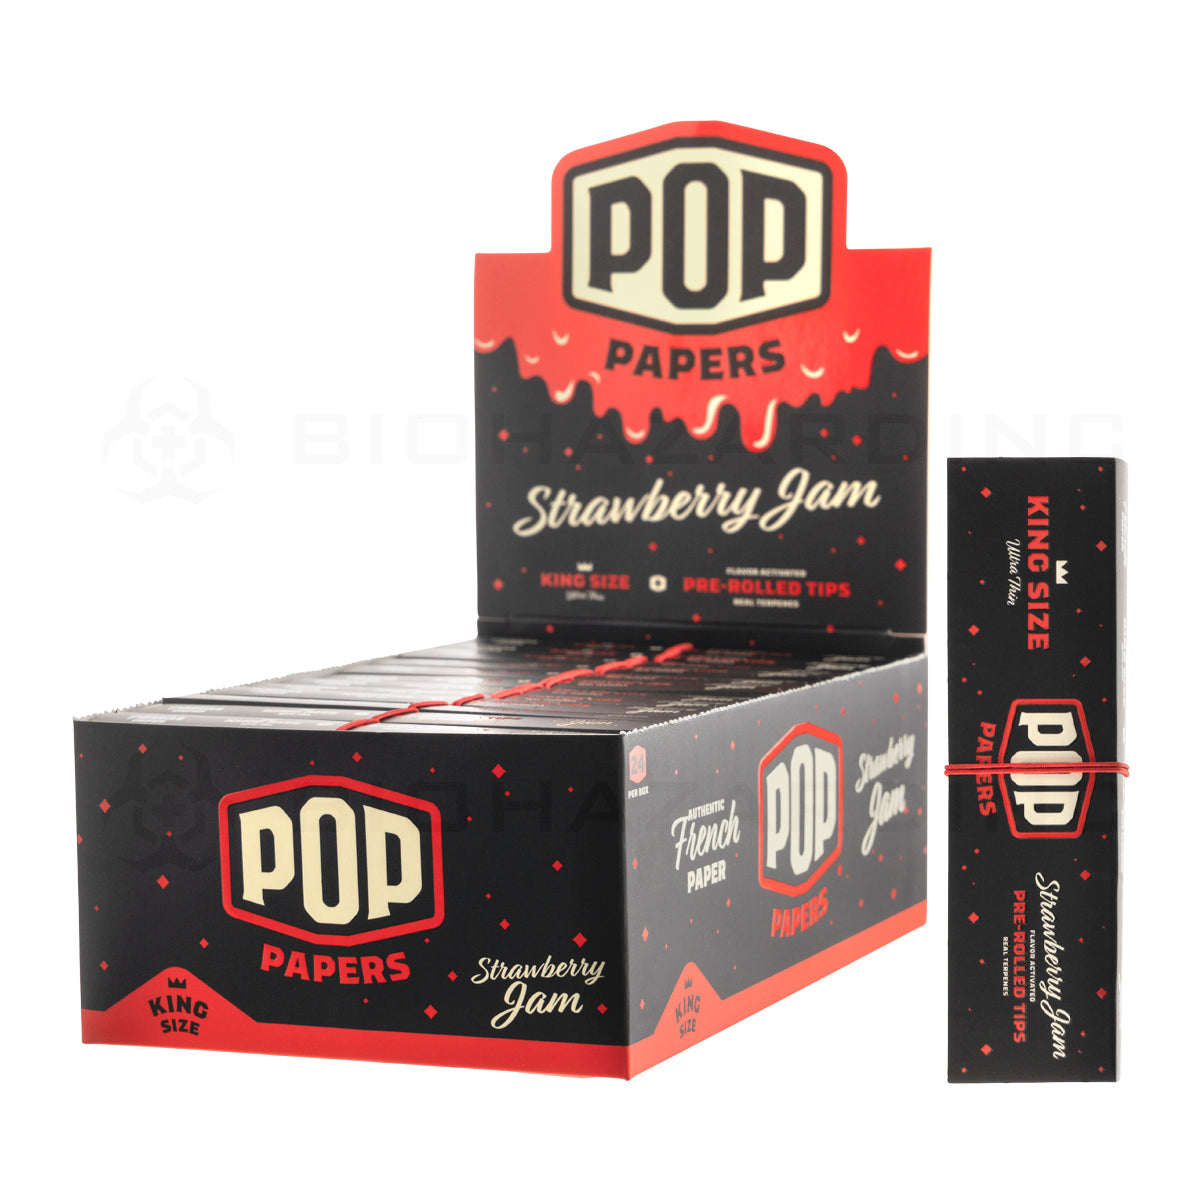 Pop Papers | Wholesale Ultra Thin King Size Rolling Paper w/ Flavor Filter Tips | 110mm - 24 Count - Various Flavors Rolling Papers Biohazard Inc Strawberry Jam  